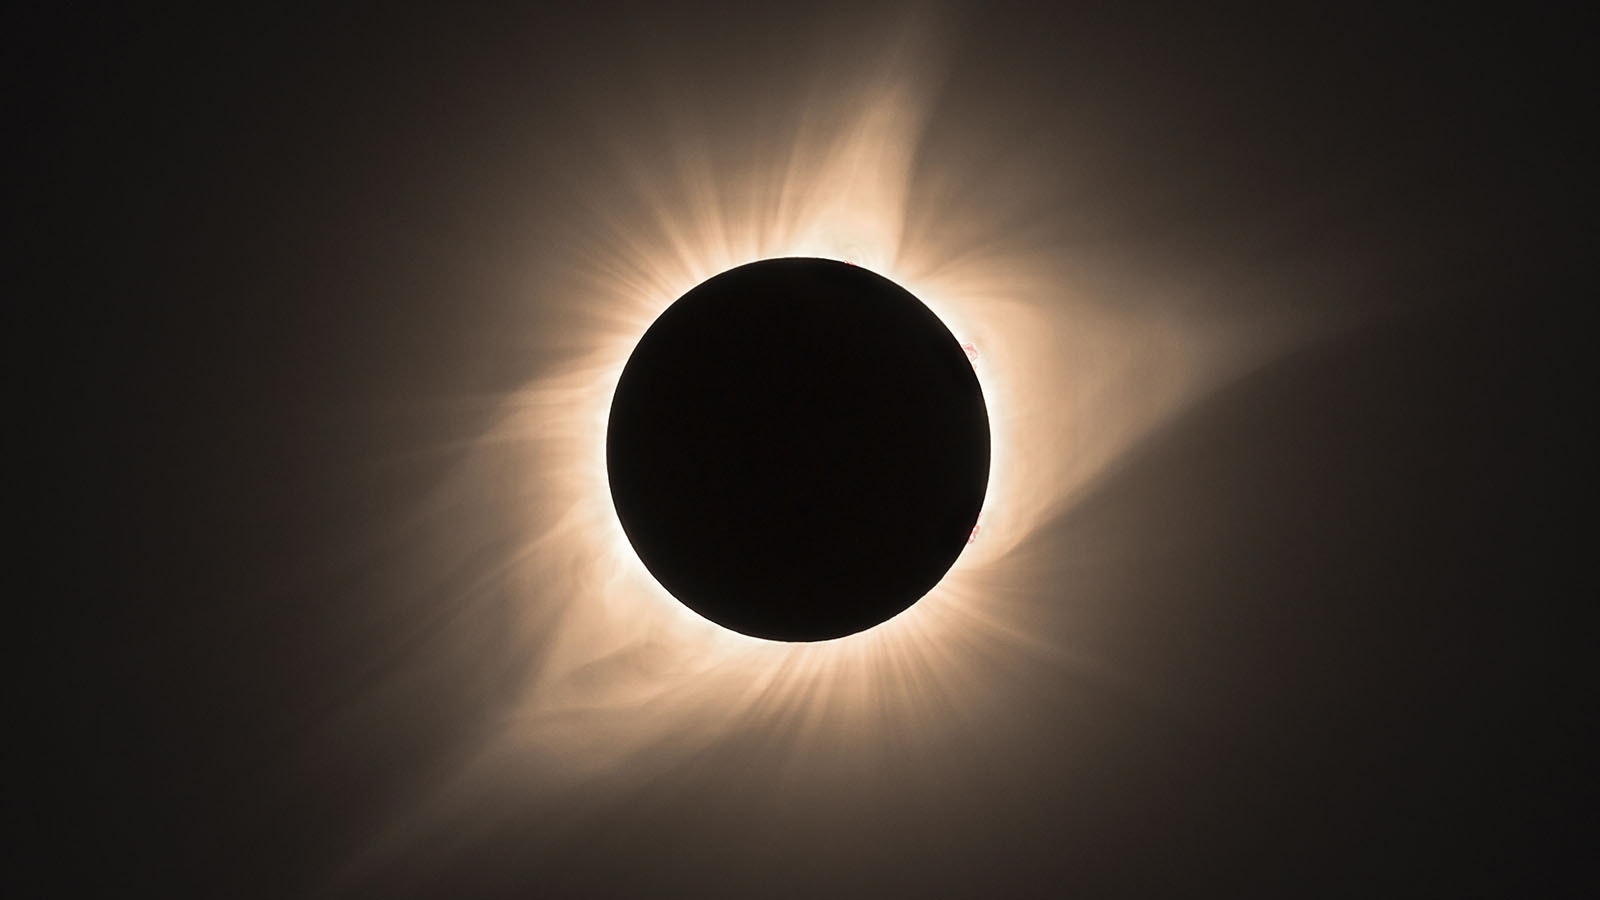 Wyoming was in the path of totality for a 2017 eclipse.